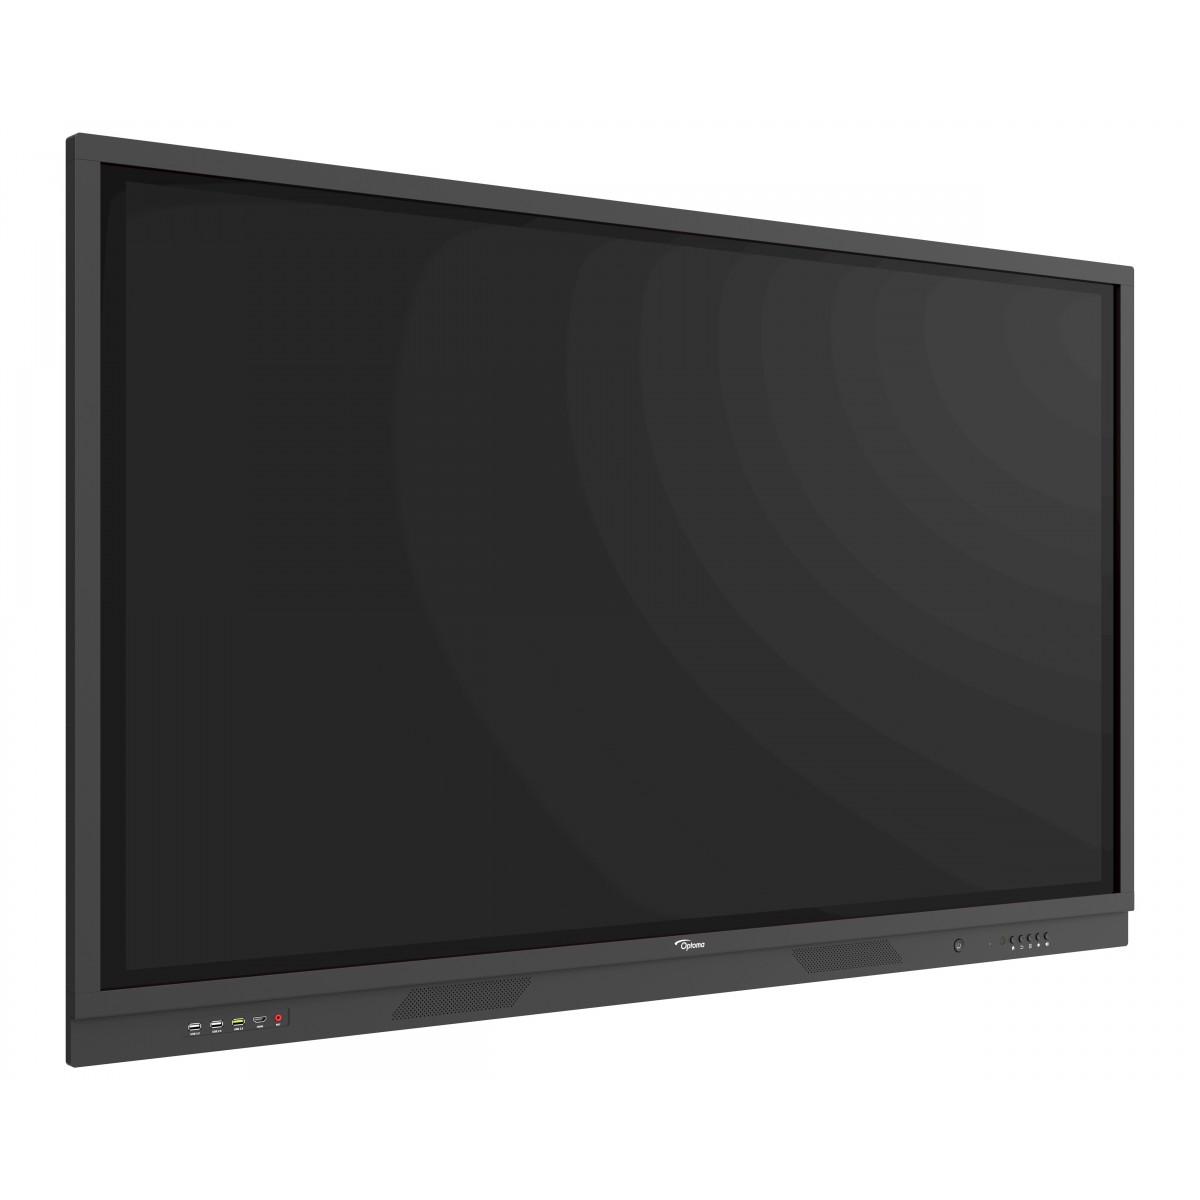 Optoma Creative Touch 3651RK - 65" Diagonal Class 3-Series LED-backlit LCD display